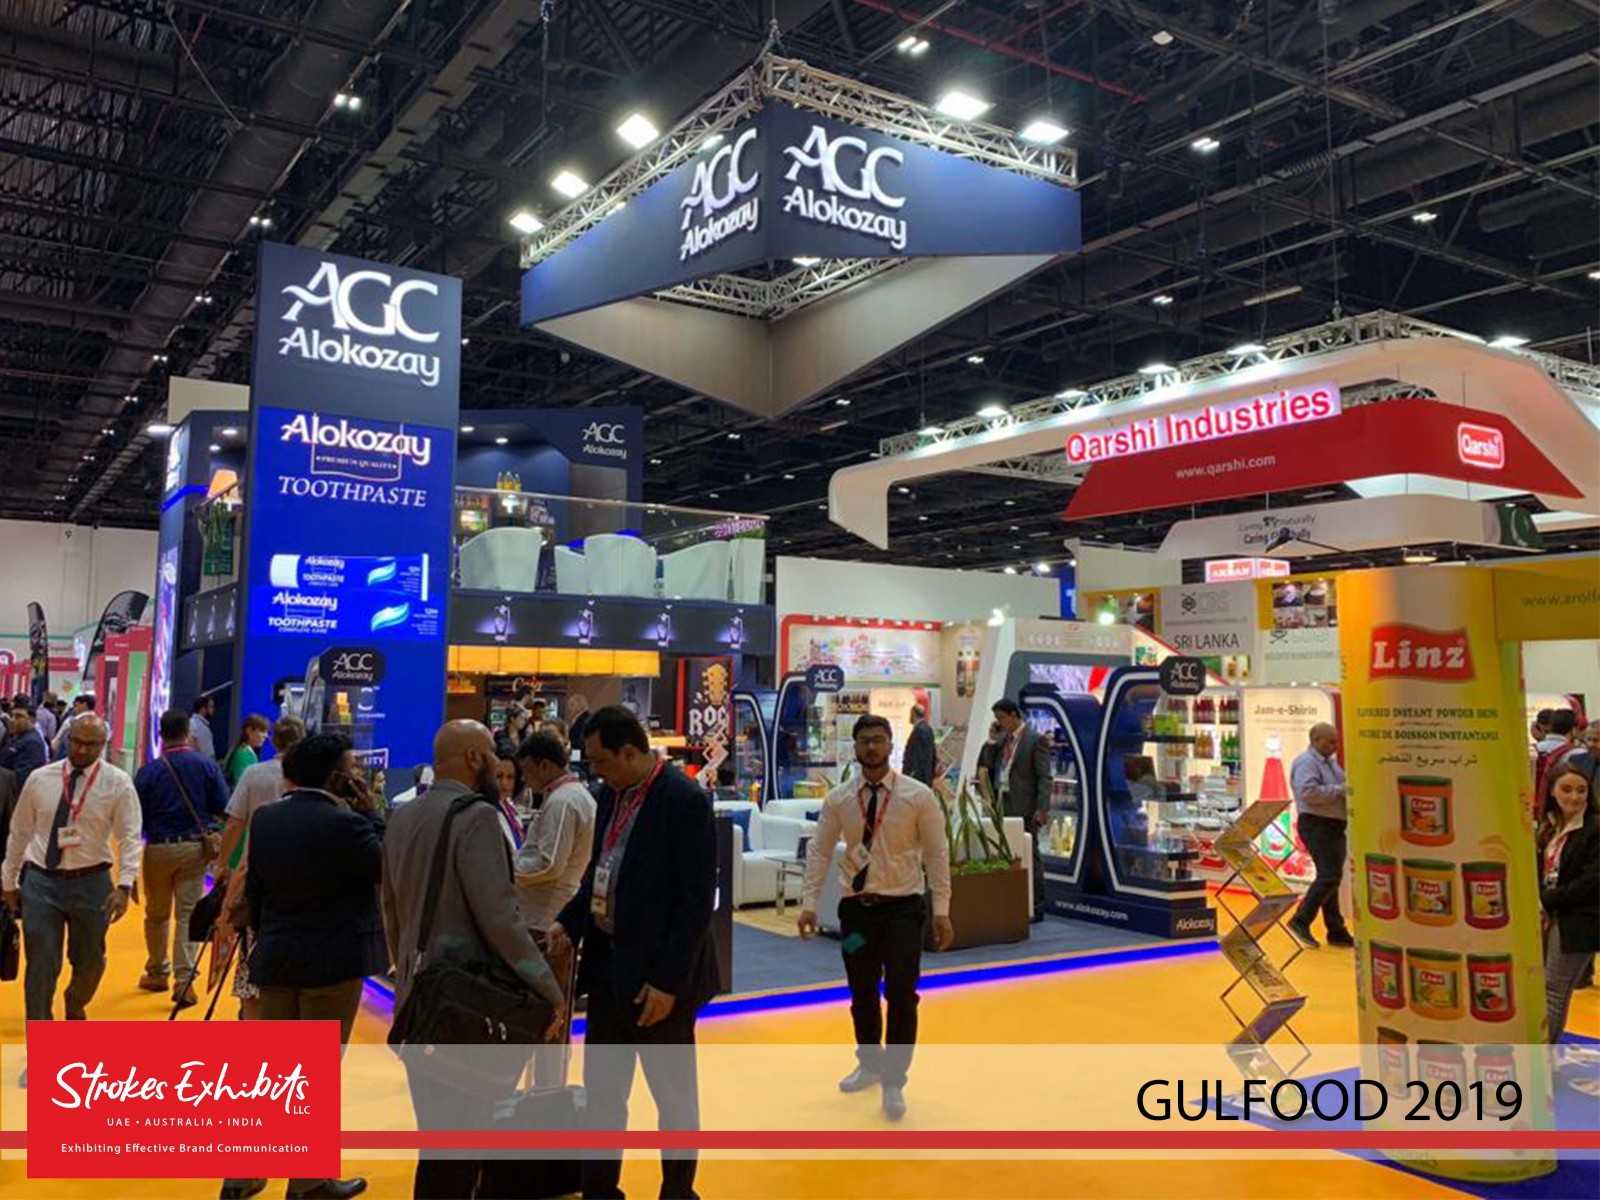 How To Attract More Visitors To Your Exhibition Stand in Dubai